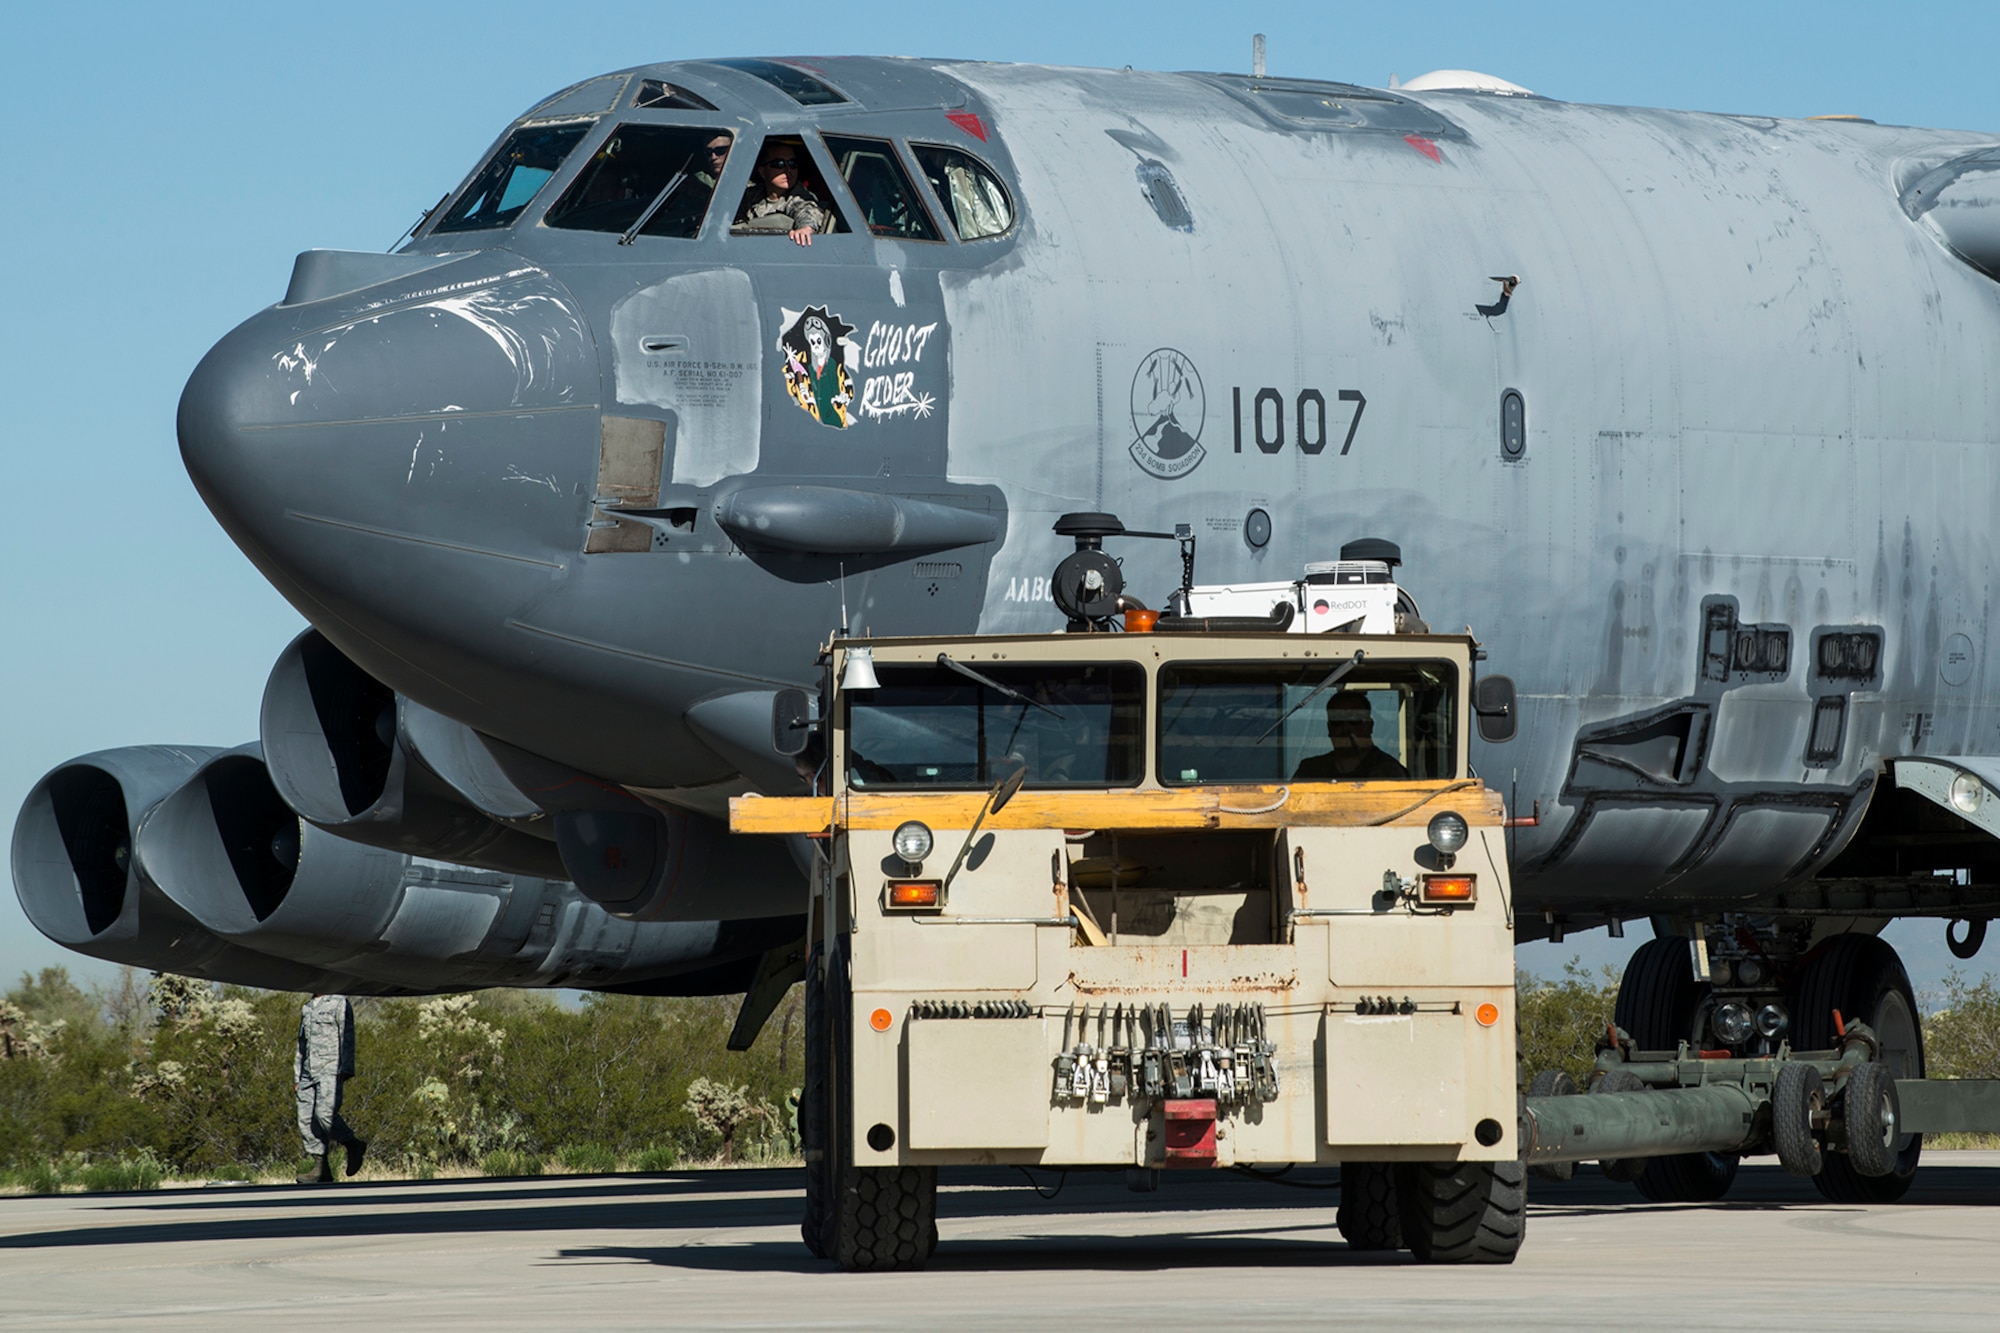 A U.S. Air Force B-52 Stratofortress is towed from a maintenance area at the 309th Aerospace Maintenance and Regeneration Group, Feb. 11, 2015, Davis-Monthan Air Force Base, Ariz. The aircraft, tail number 61-1007 and known as the "Ghost Rider", is being regenerated for active service after sitting in storage since 2008 when it was decommissioned and sent the Boneyard. (U.S. Air Force photo by Master Sgt. Greg Steele/Released)